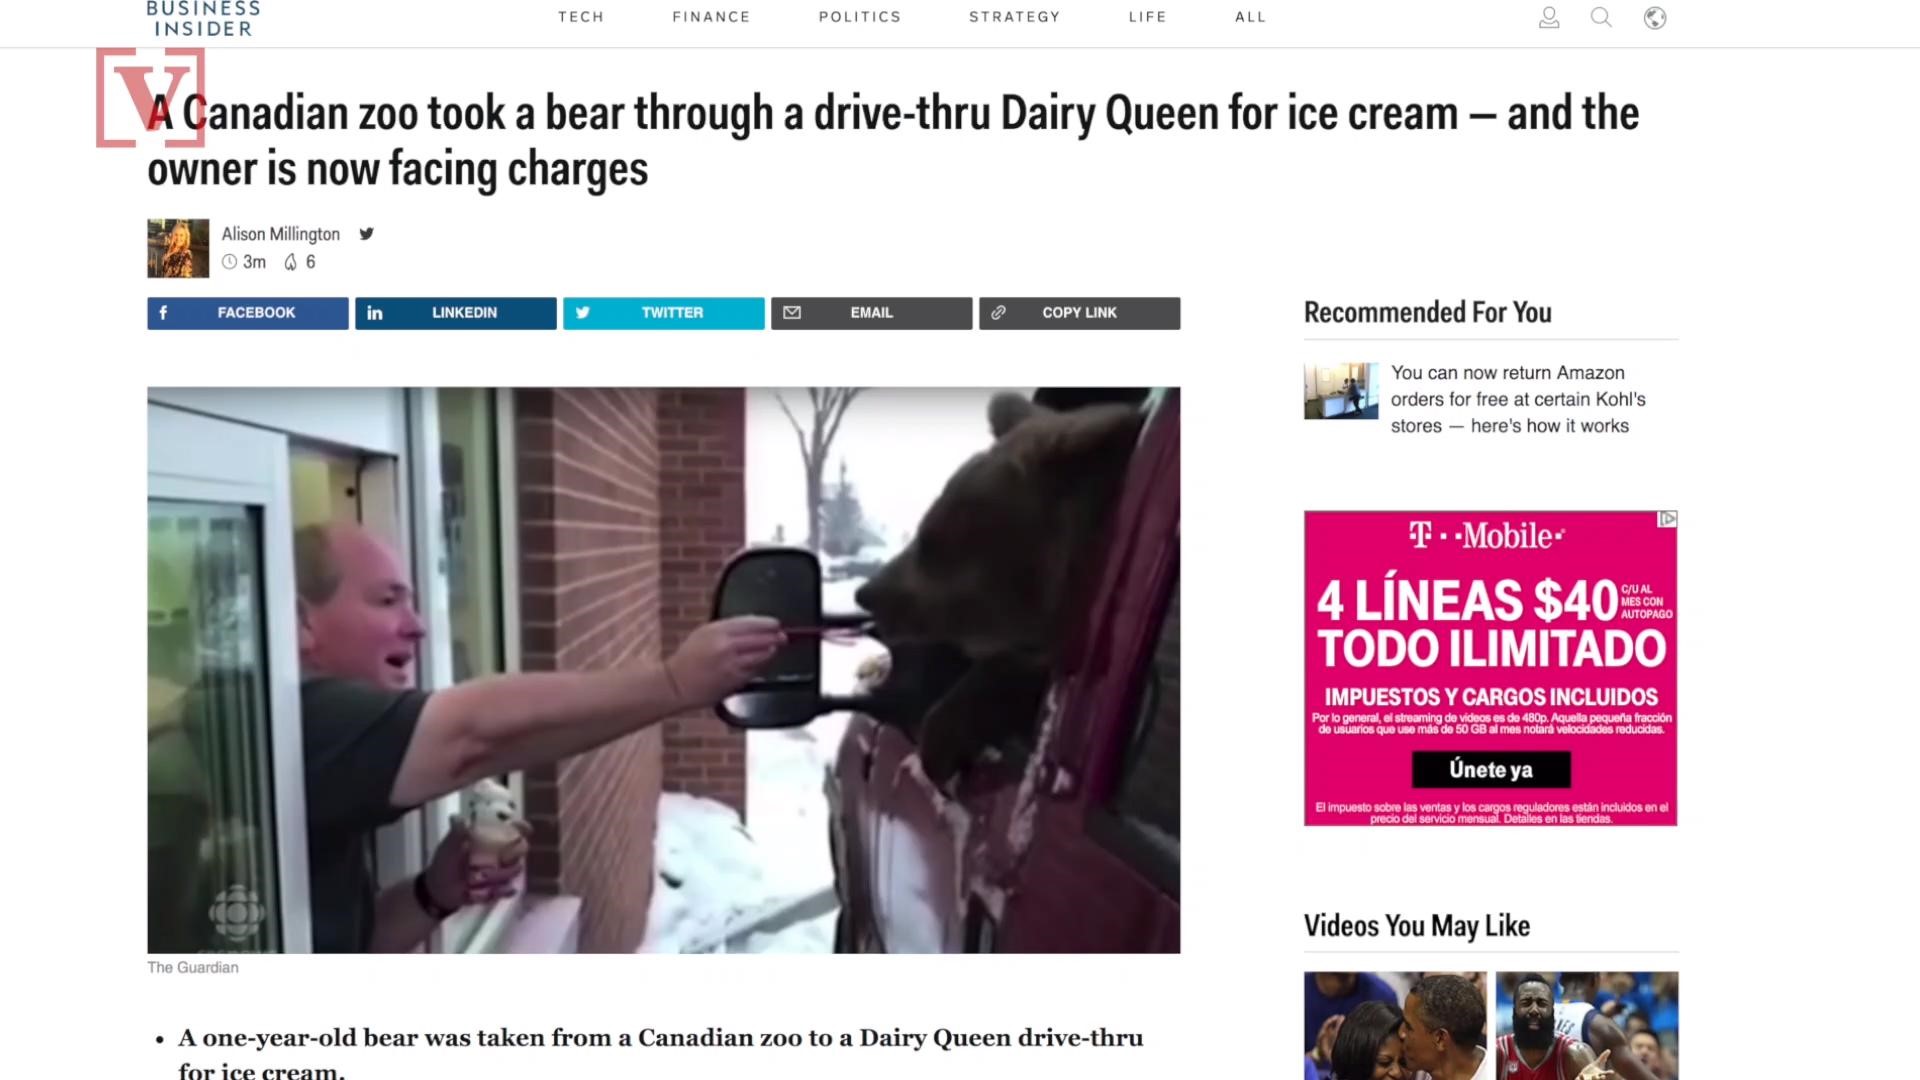 A viral moment showing a bear eating an ice cream cone from the drive-thru of a Dairy Queen in Canada, now under investigation according to Business Insider. Nathan Rousseau Smith has the story.